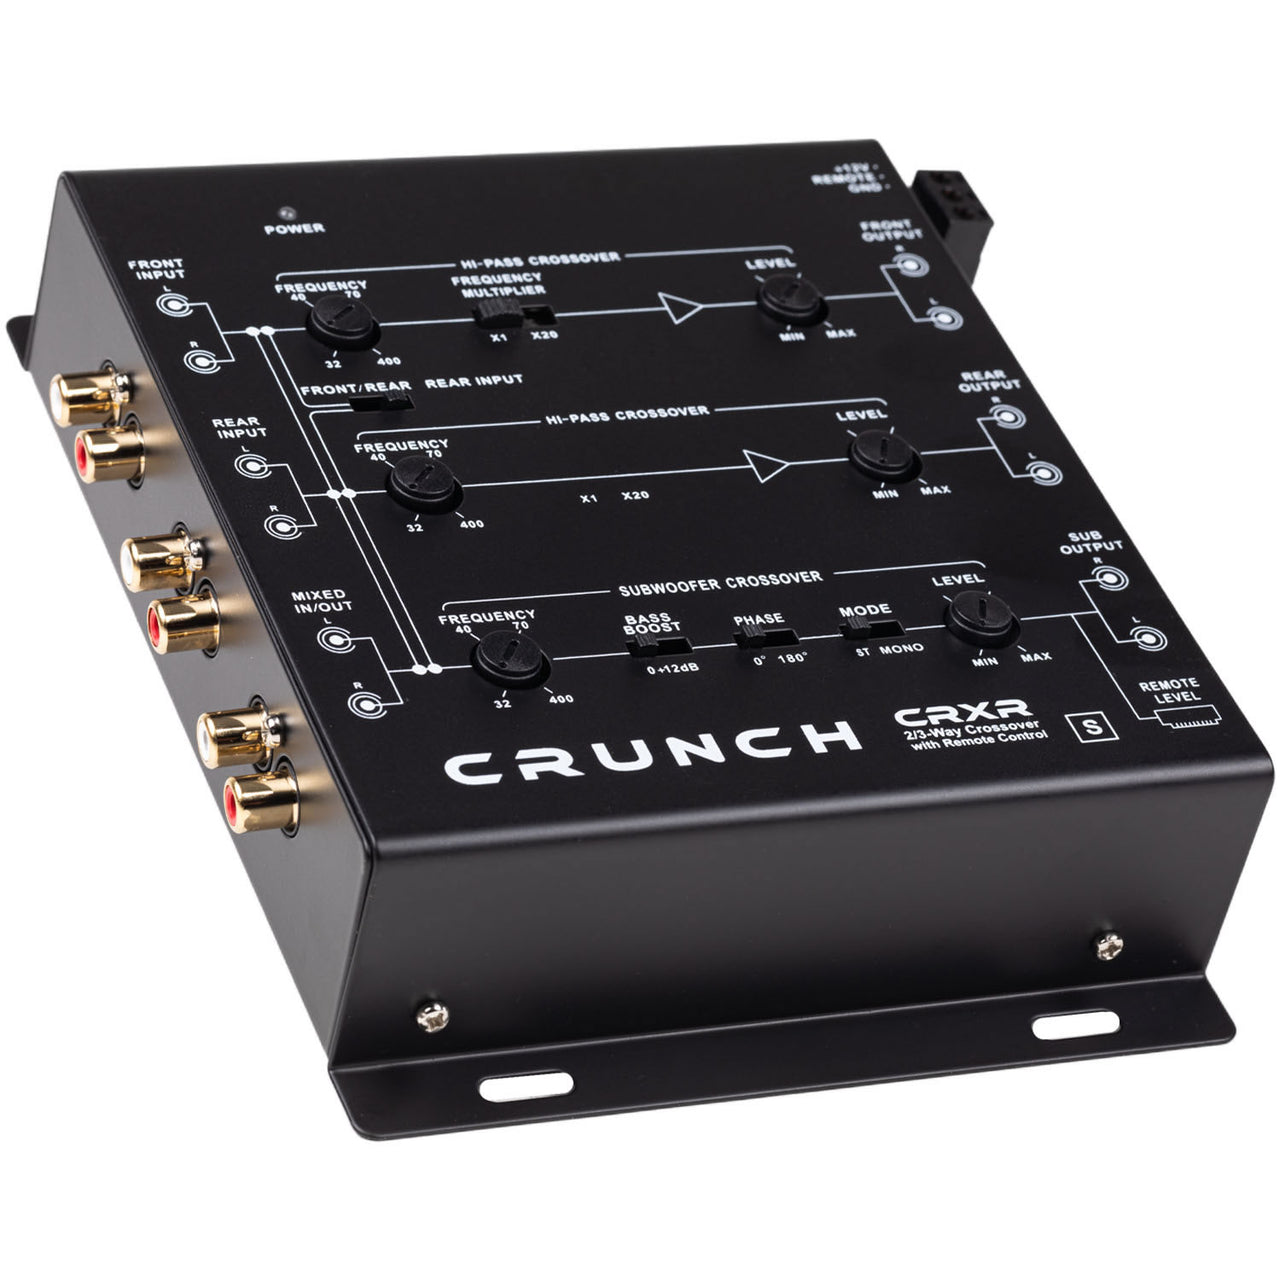 Crunch Ground Pounder CRXR 2-way/3-way active x-over with bass remote control.